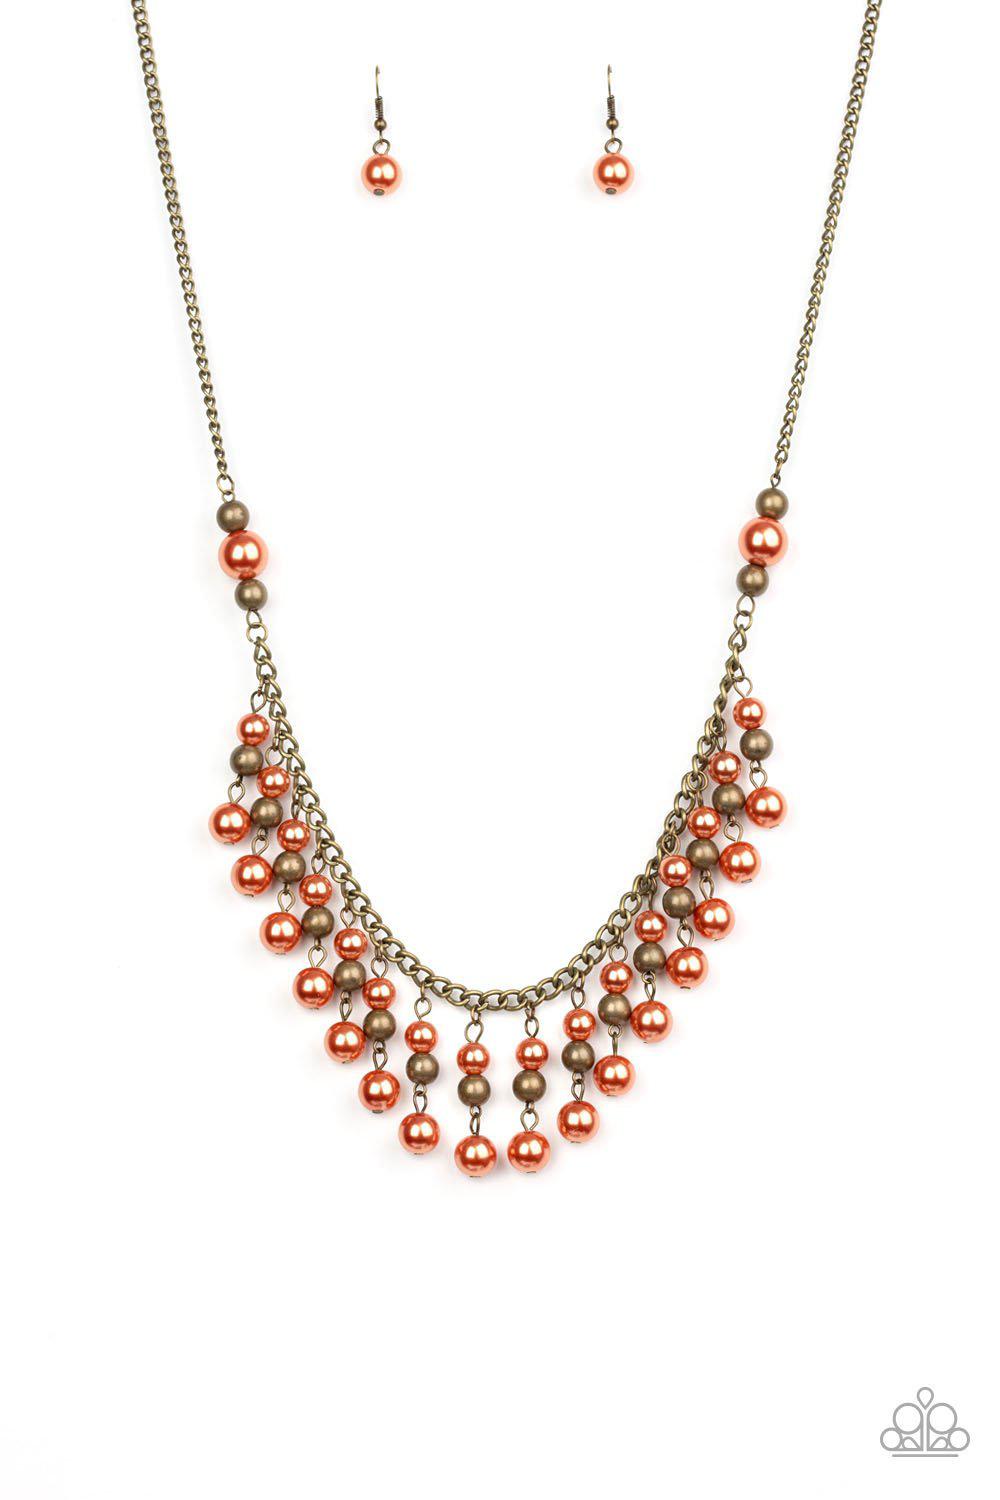 Location, Location, Location Orange and Brass Necklace - Paparazzi Accessories - lightbox -CarasShop.com - $5 Jewelry by Cara Jewels